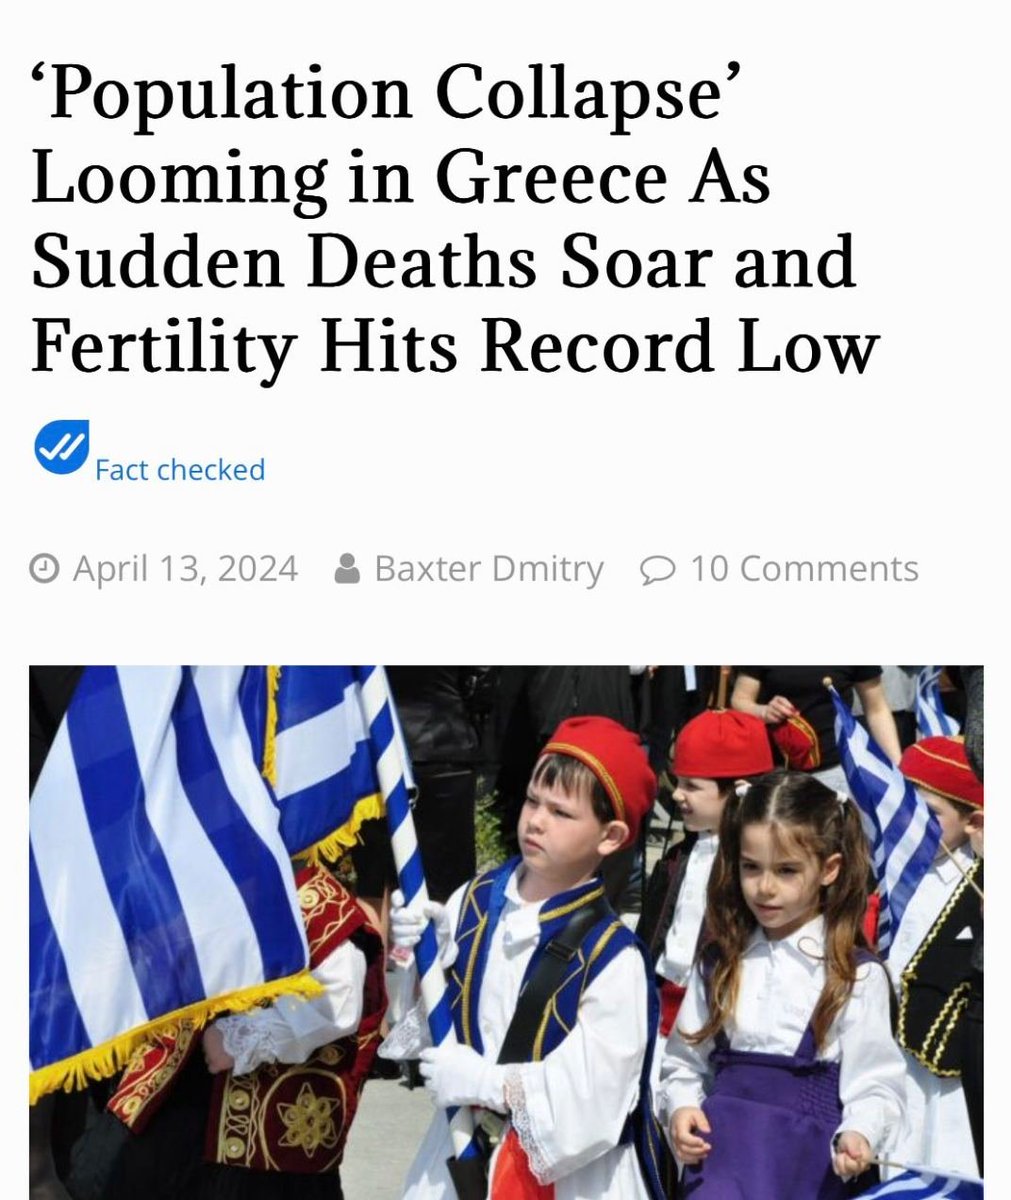 Greece: Sudden death, heart attacks, strokes, blood clots, cancer, fertility problems.

Greece is on the brink of becoming the first country to experience a 'population collapse' as sudden deaths and health issues like heart failure, strokes, blood clots, and rapid onset cancers…